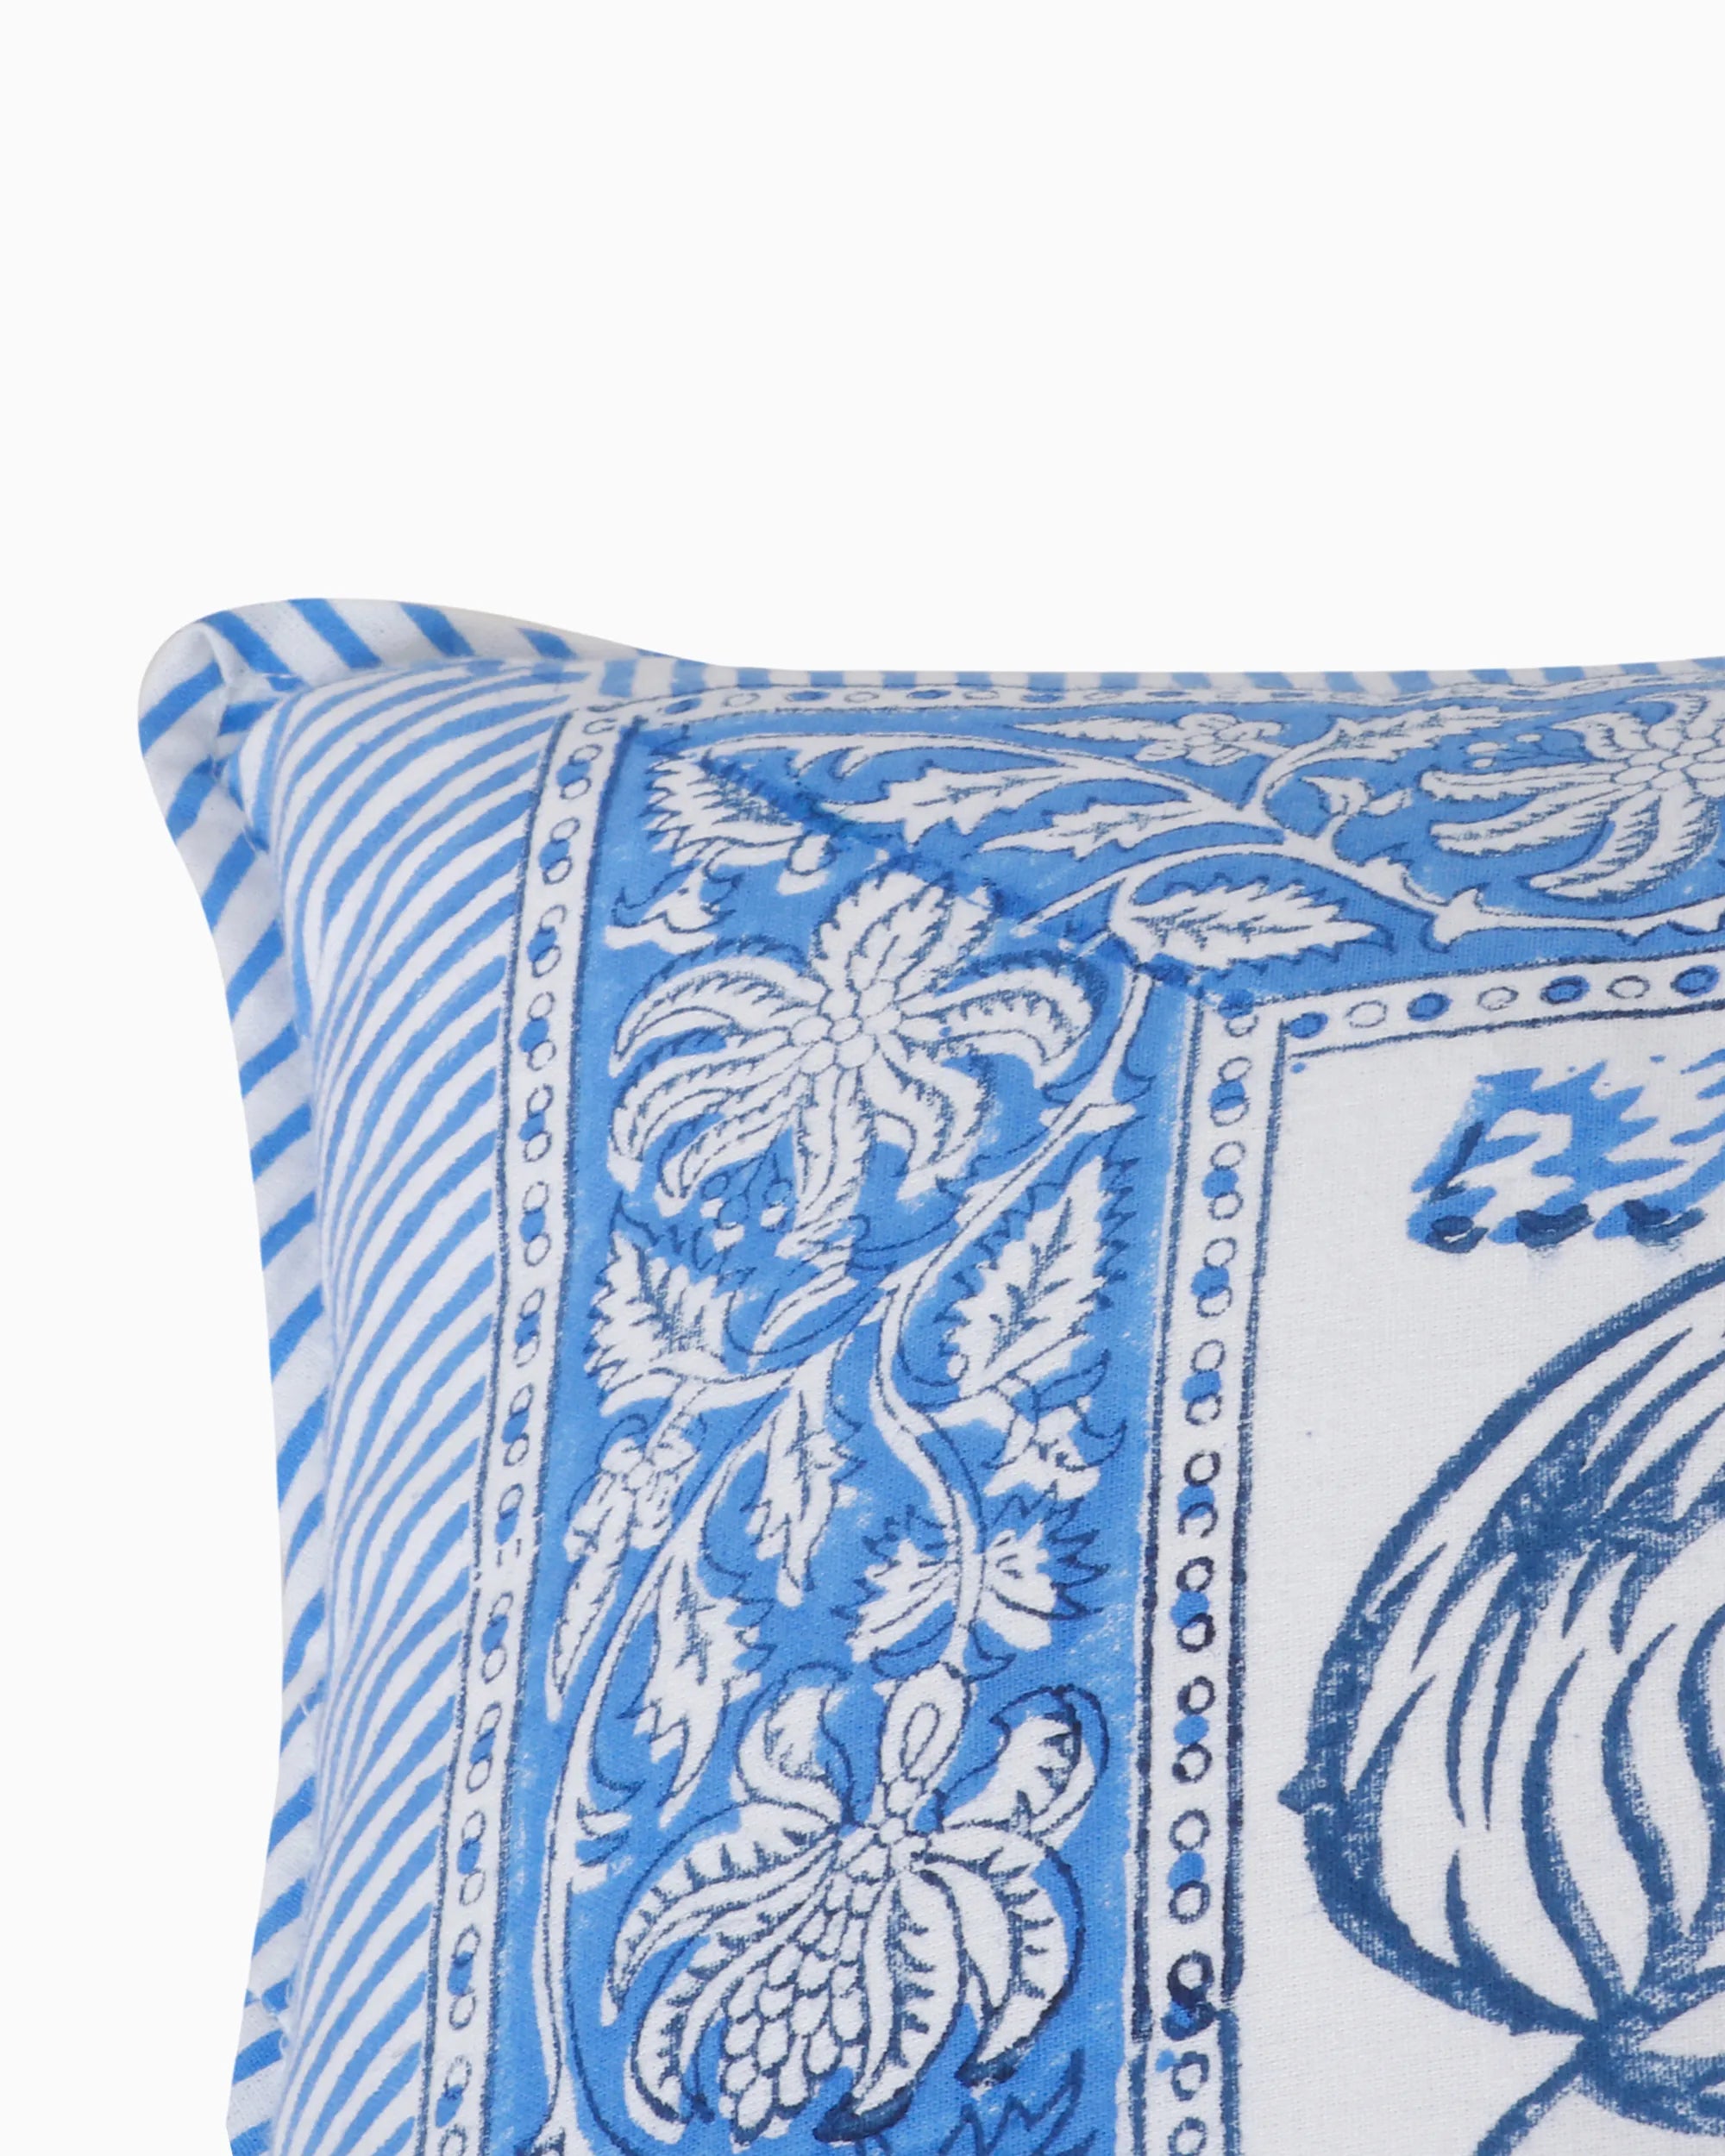 Cordate Pillow Cover (Set of 2)